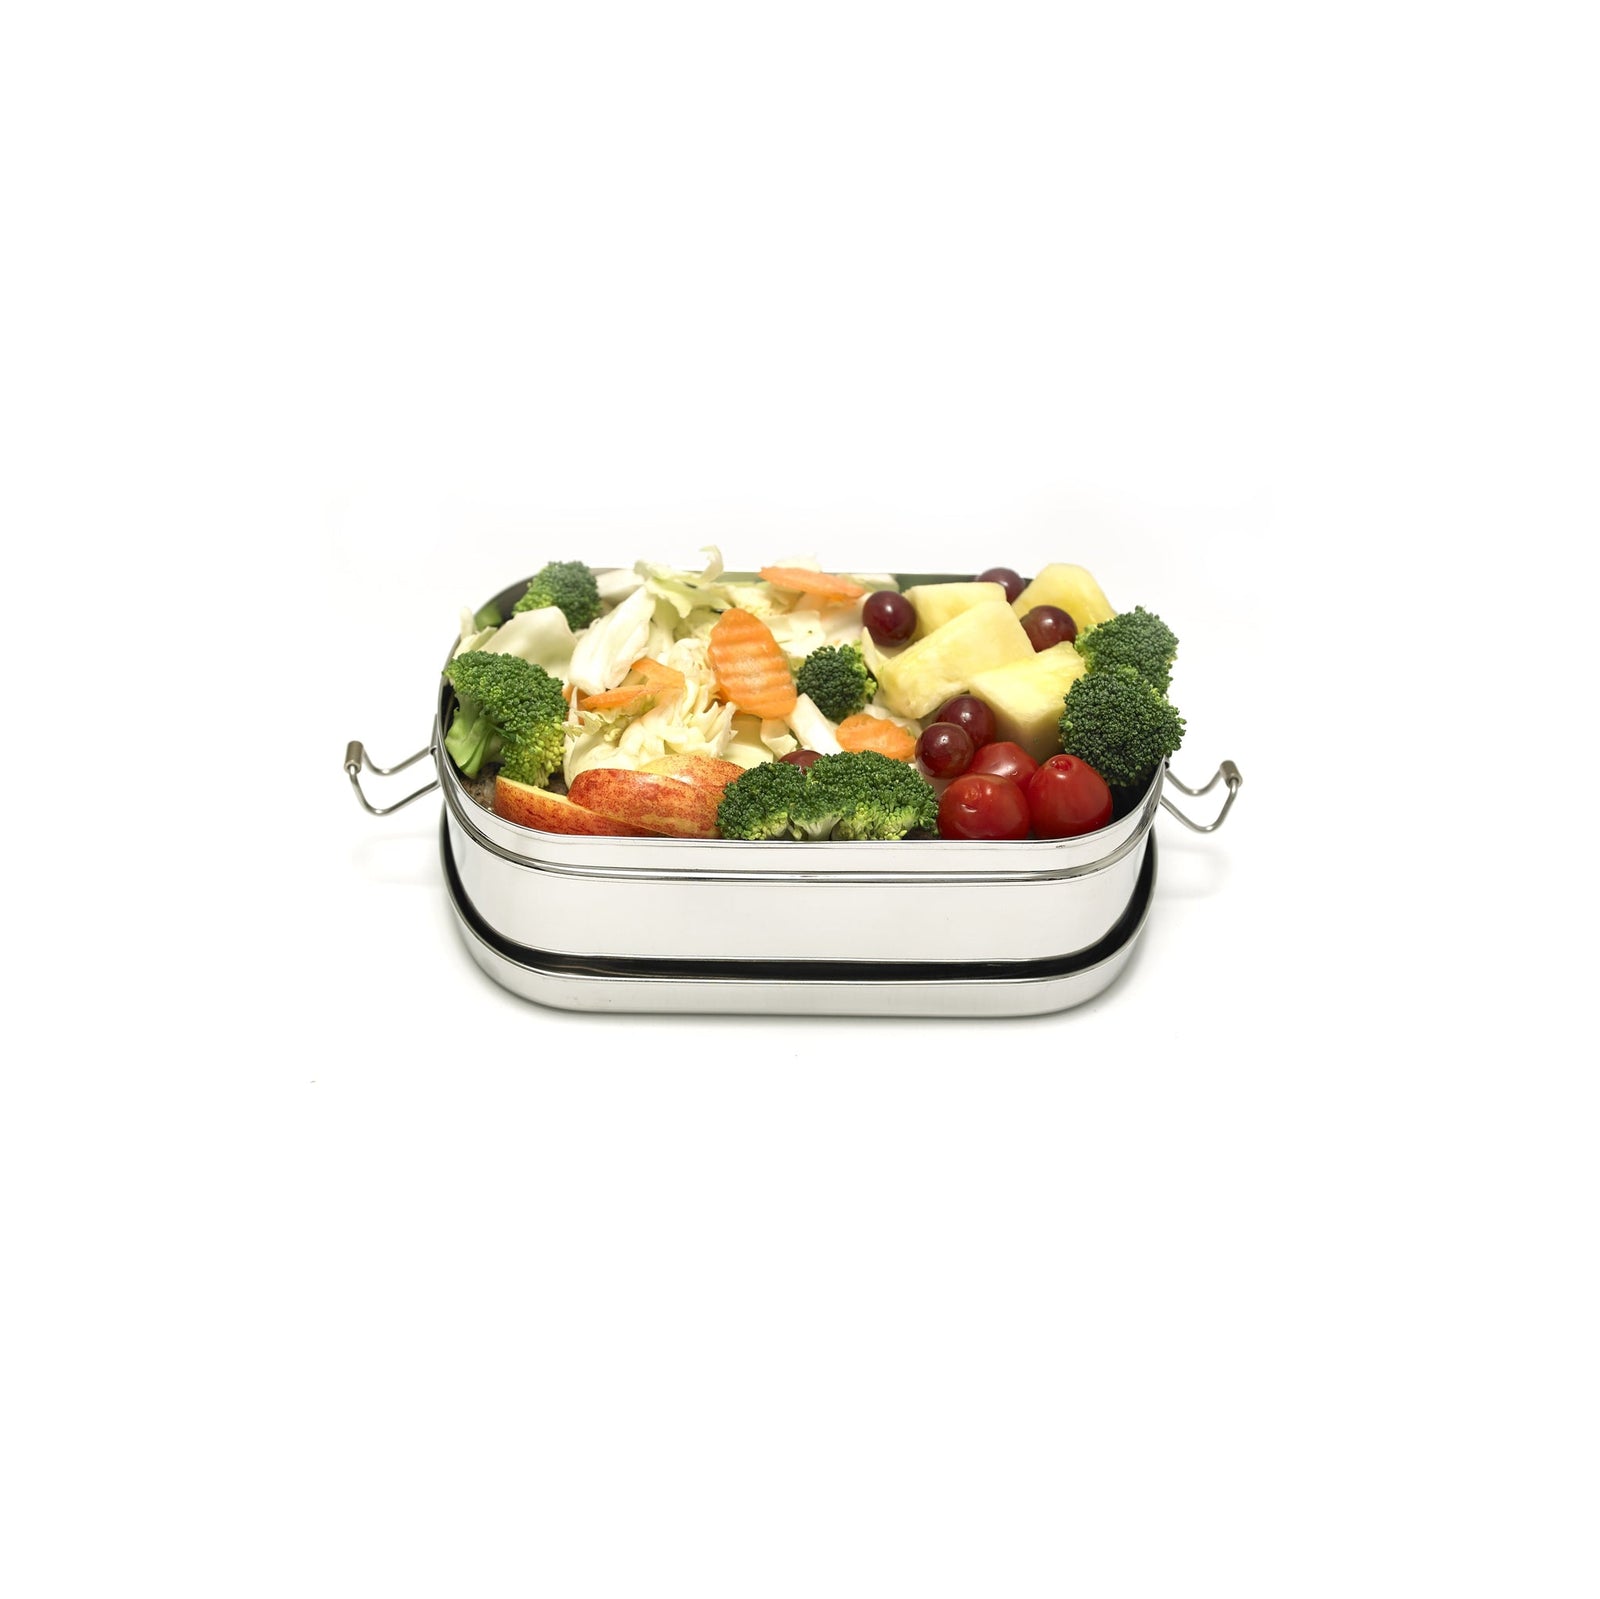 large-oval-lunchbox-826777_1024x1024@2x